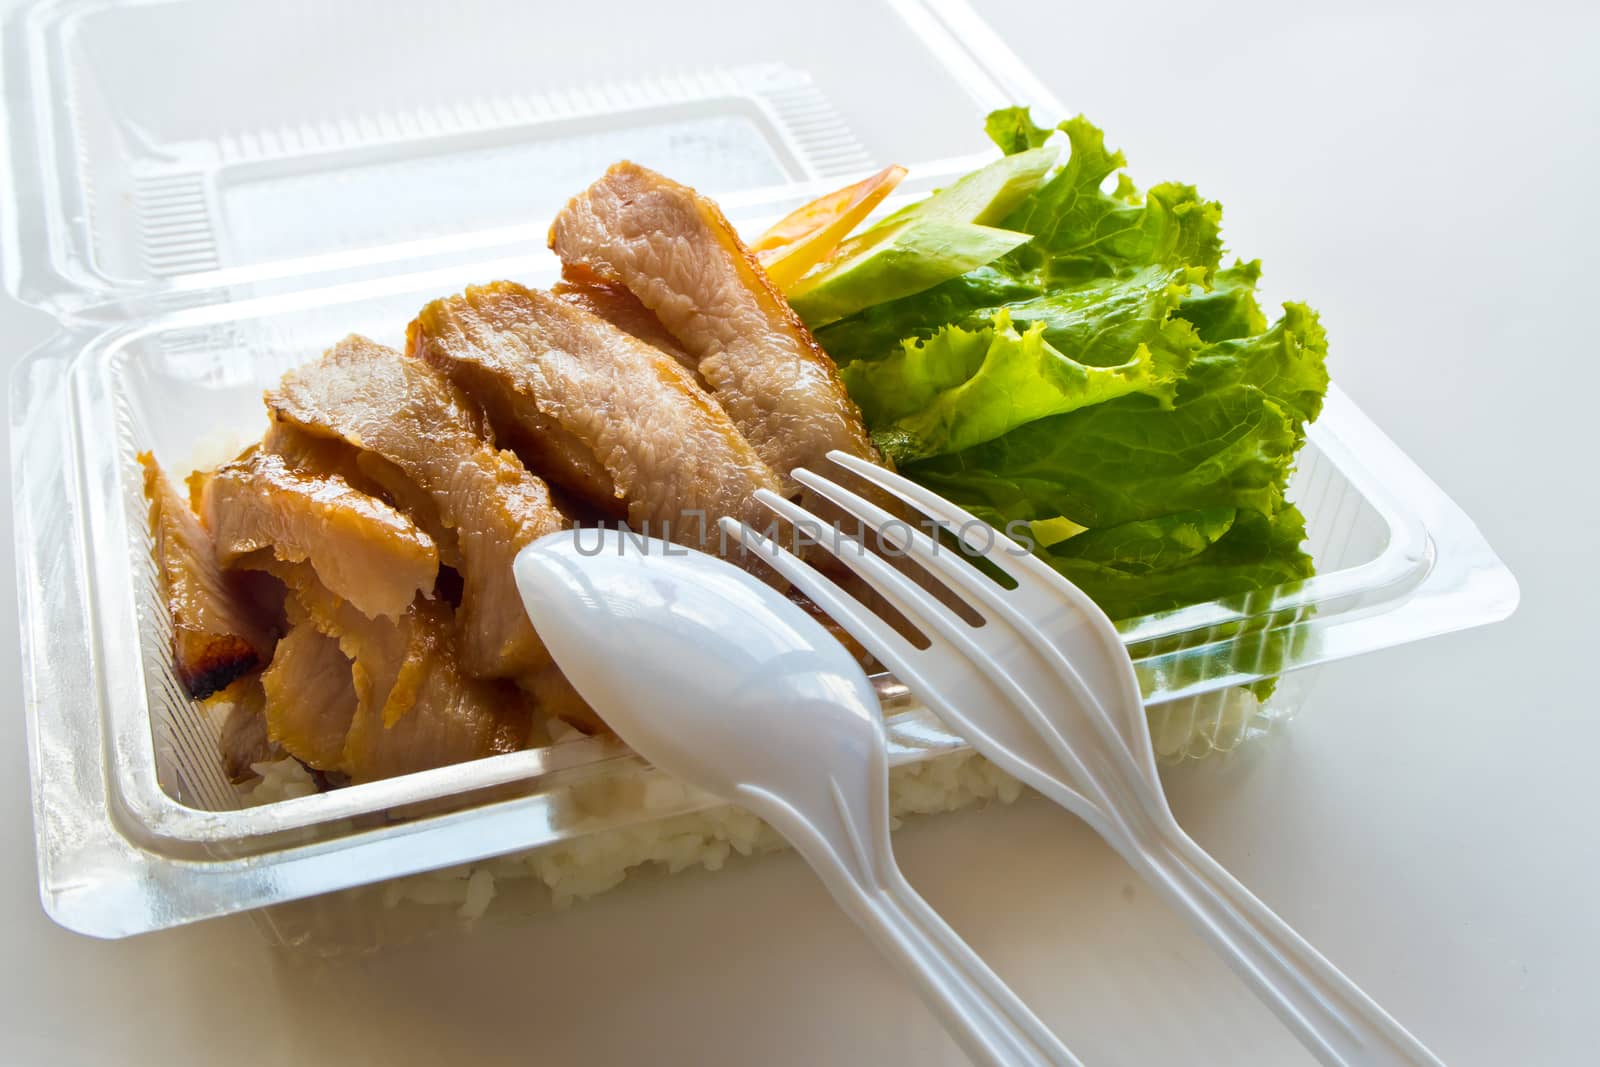 Roasted pork and rice in a plastic box